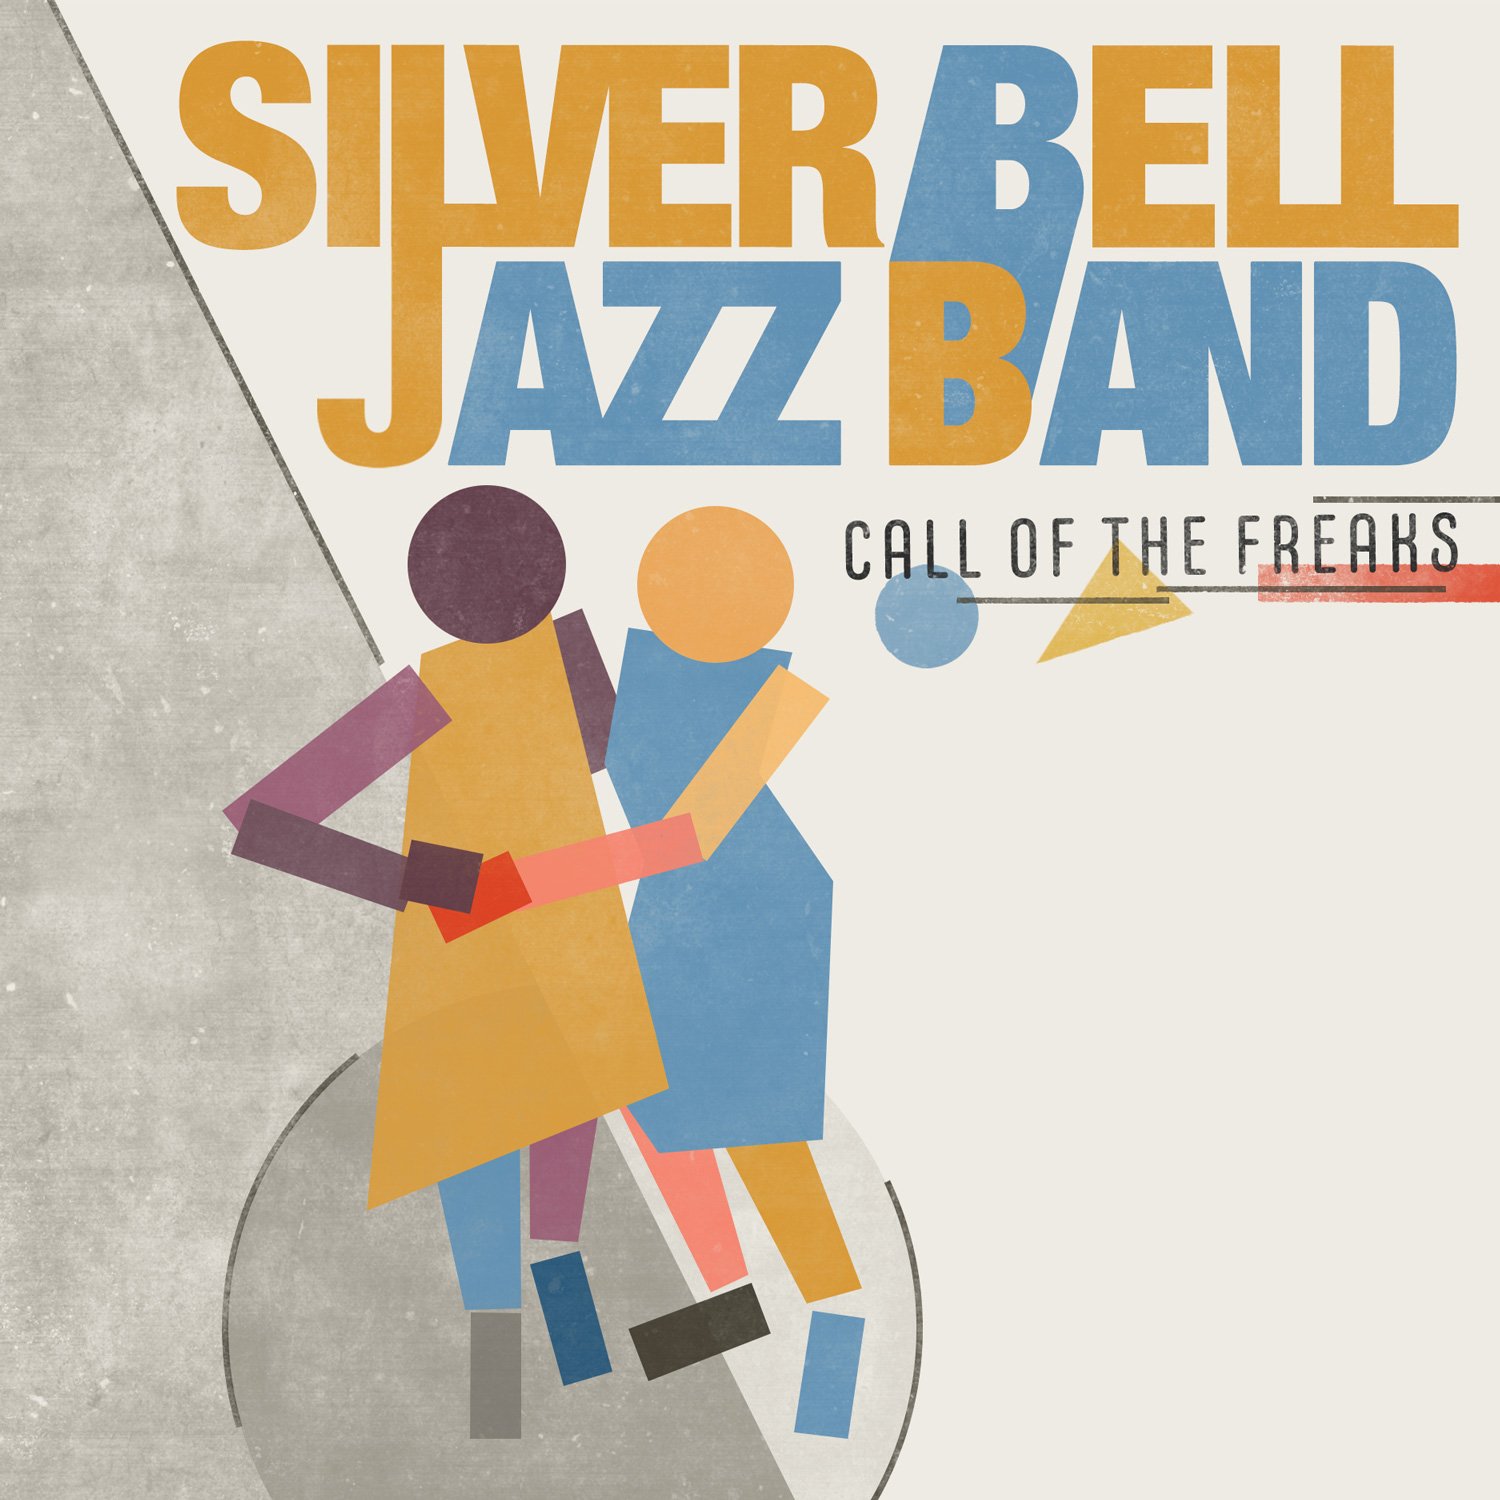 Call of the freaks Silver Bell Jazz Band album front cover design